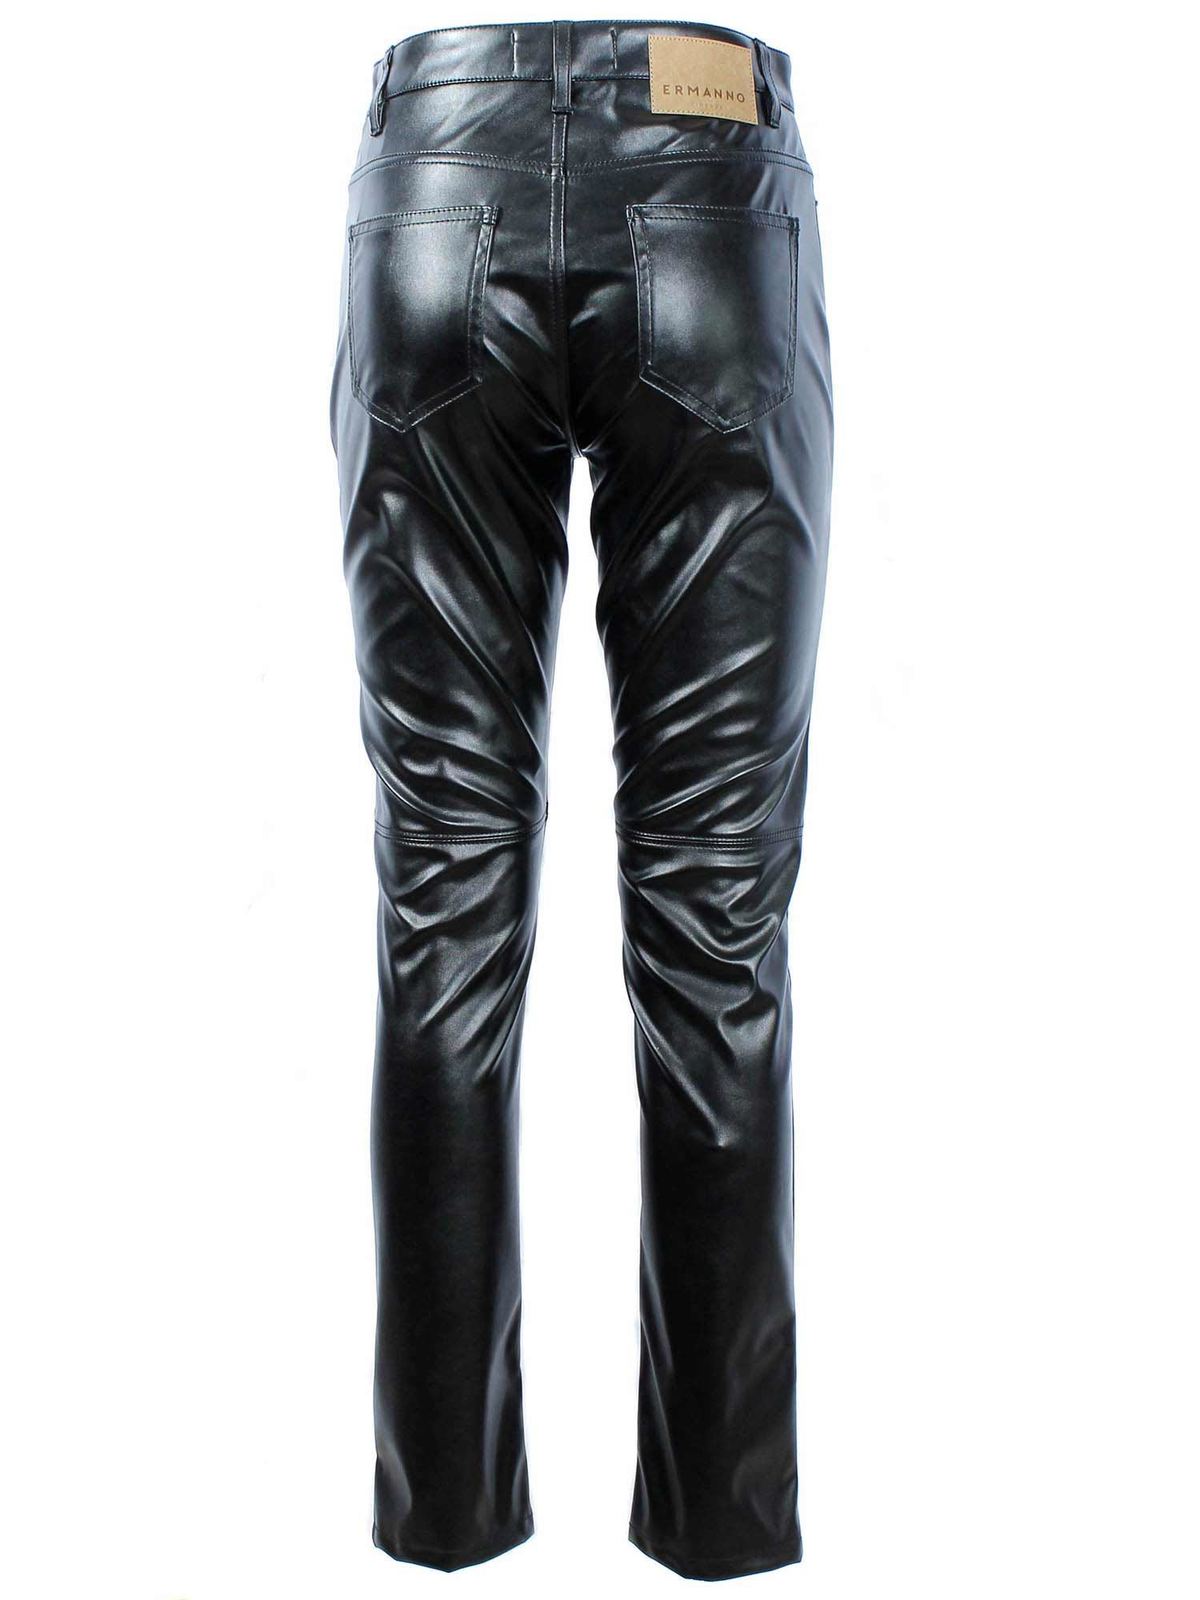 Leather trousers Ermanno Scervino  Synthetic leather pants in black   D39ETPL07ECOMF099